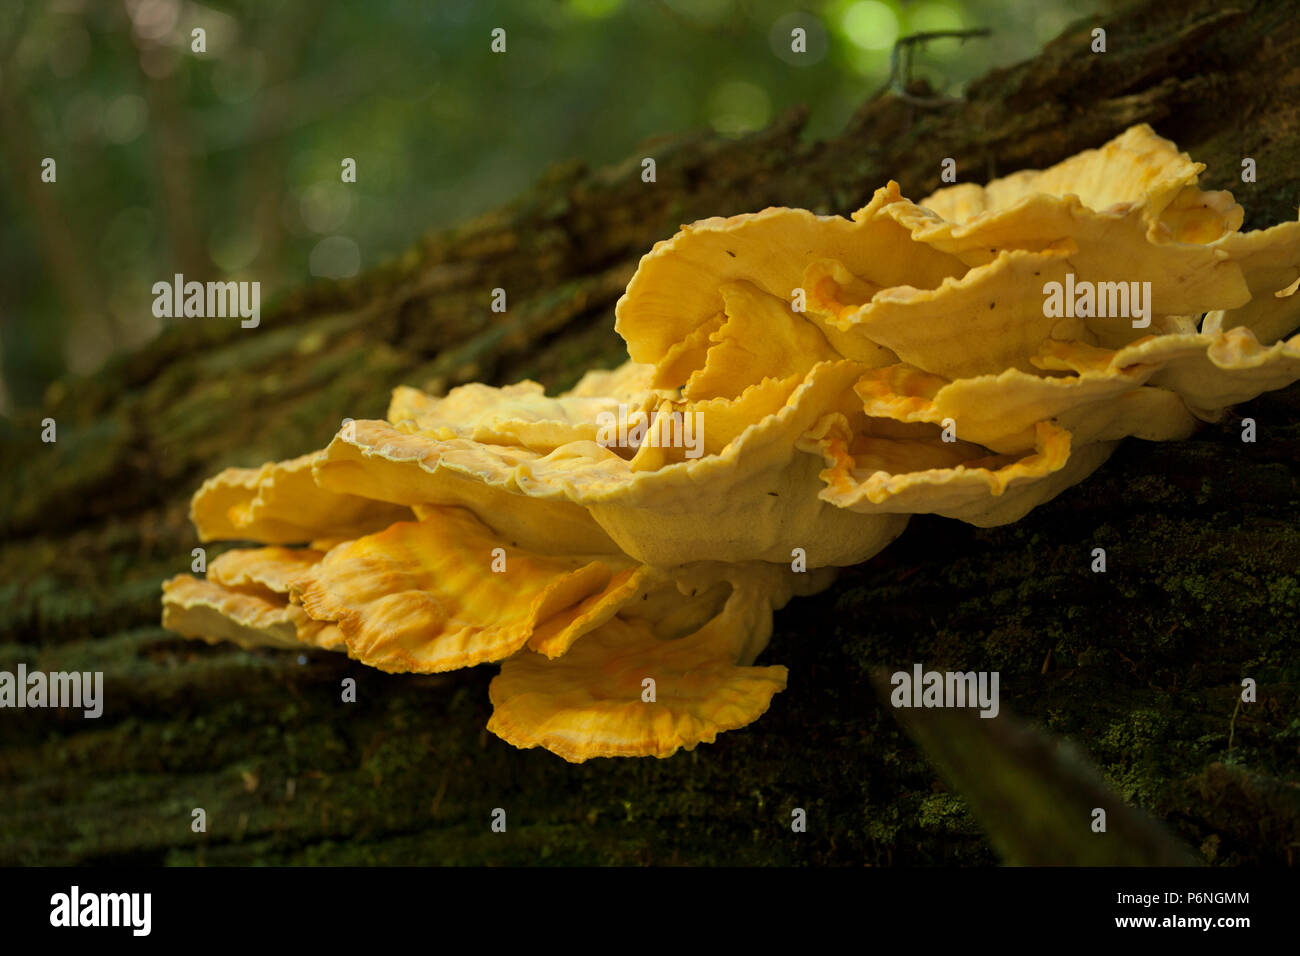 Chicken of the woods fungi, Laetiporus sulphureus, sometimes called Sulphur polypore found growing in the New Forest in Hampshire England UK GB. The c Stock Photo